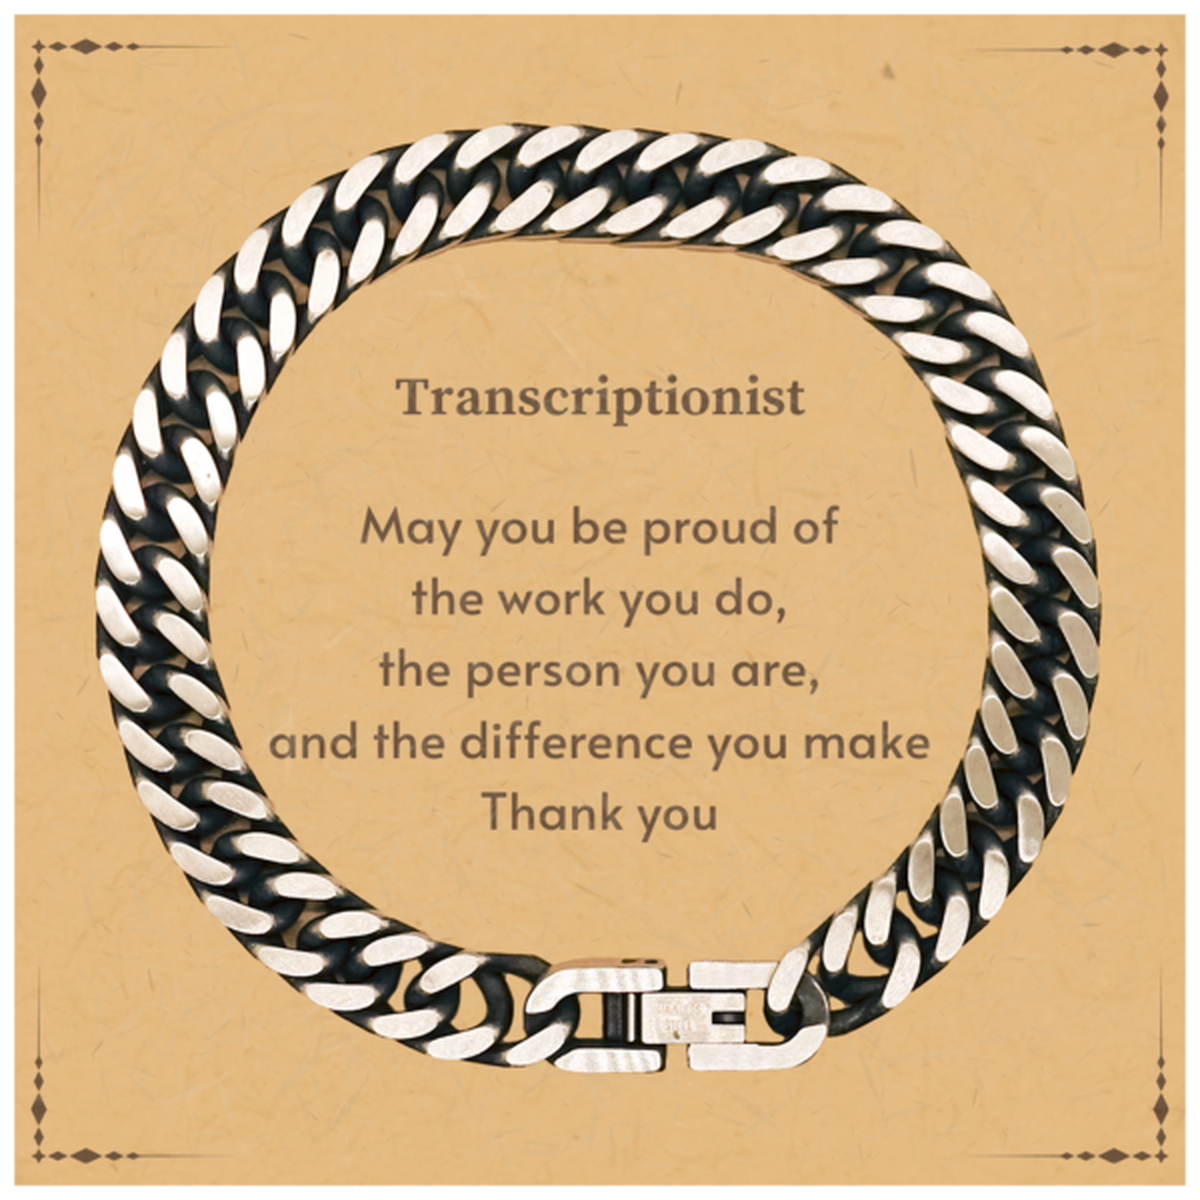 Heartwarming Cuban Link Chain Bracelet Retirement Coworkers Gifts for Transcriptionist, Transcriptionist May You be proud of the work you do, the person you are Gifts for Boss Men Women Friends